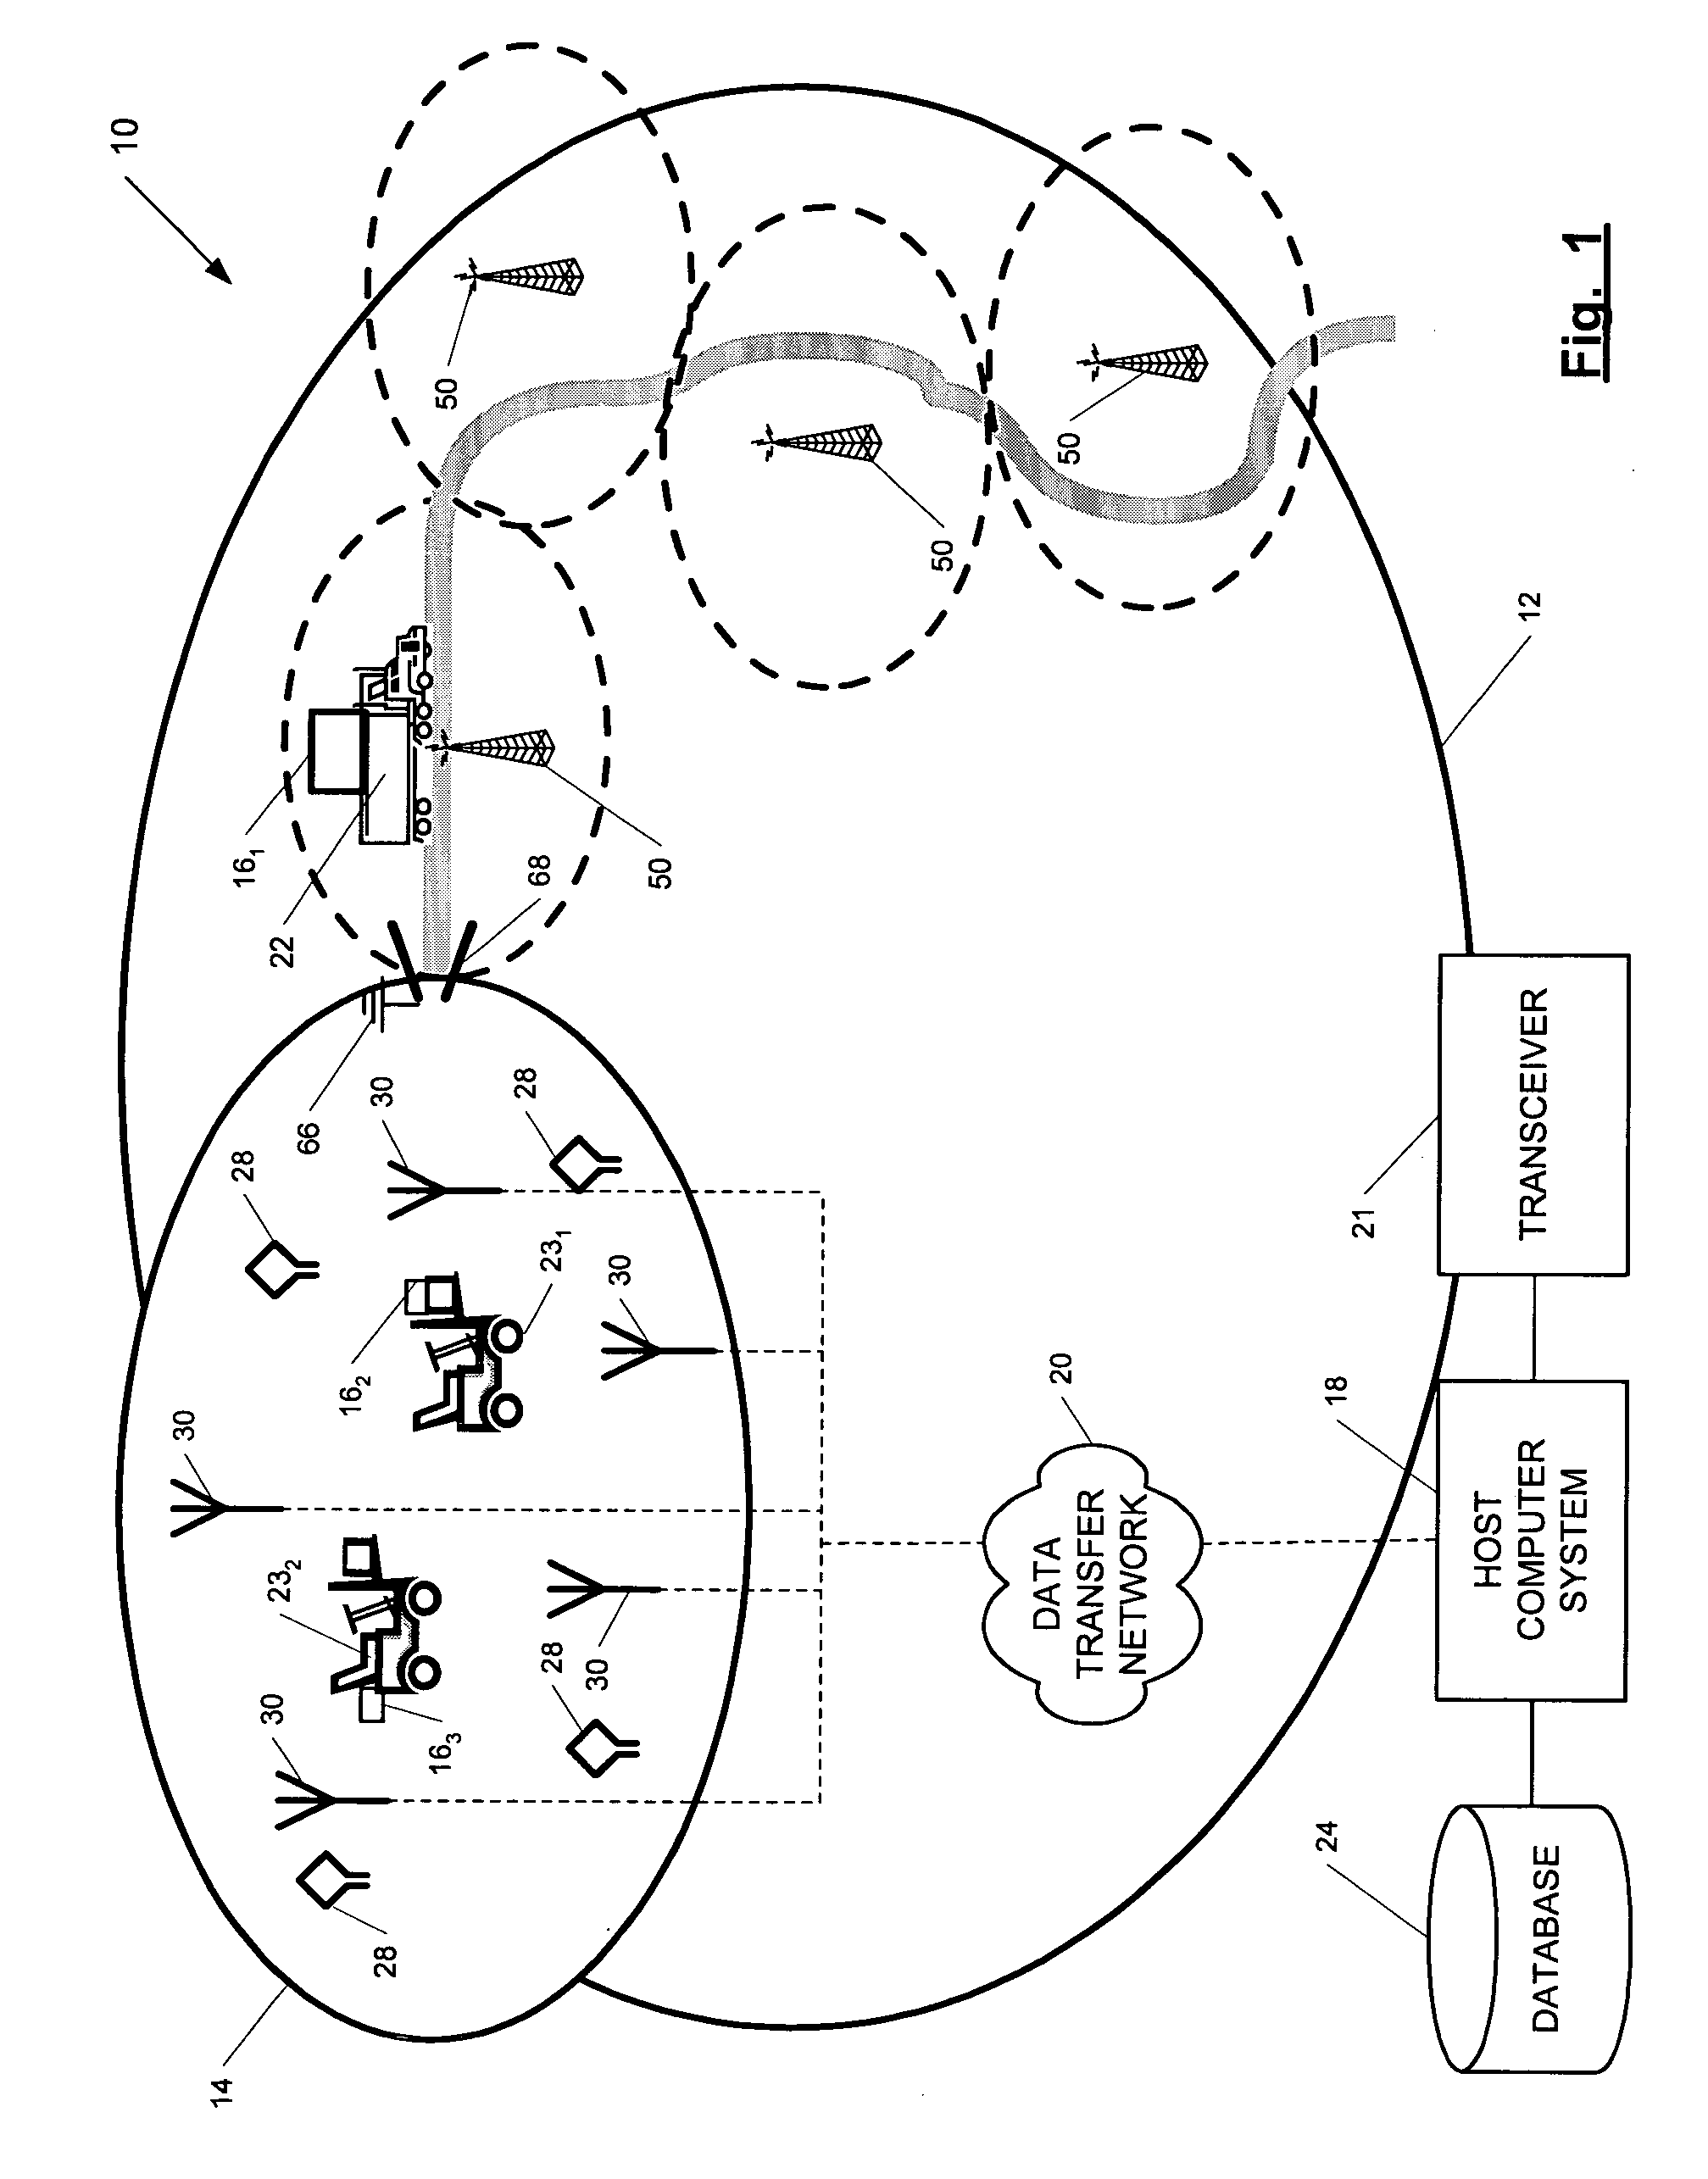 Position-tracking device for position-tracking system